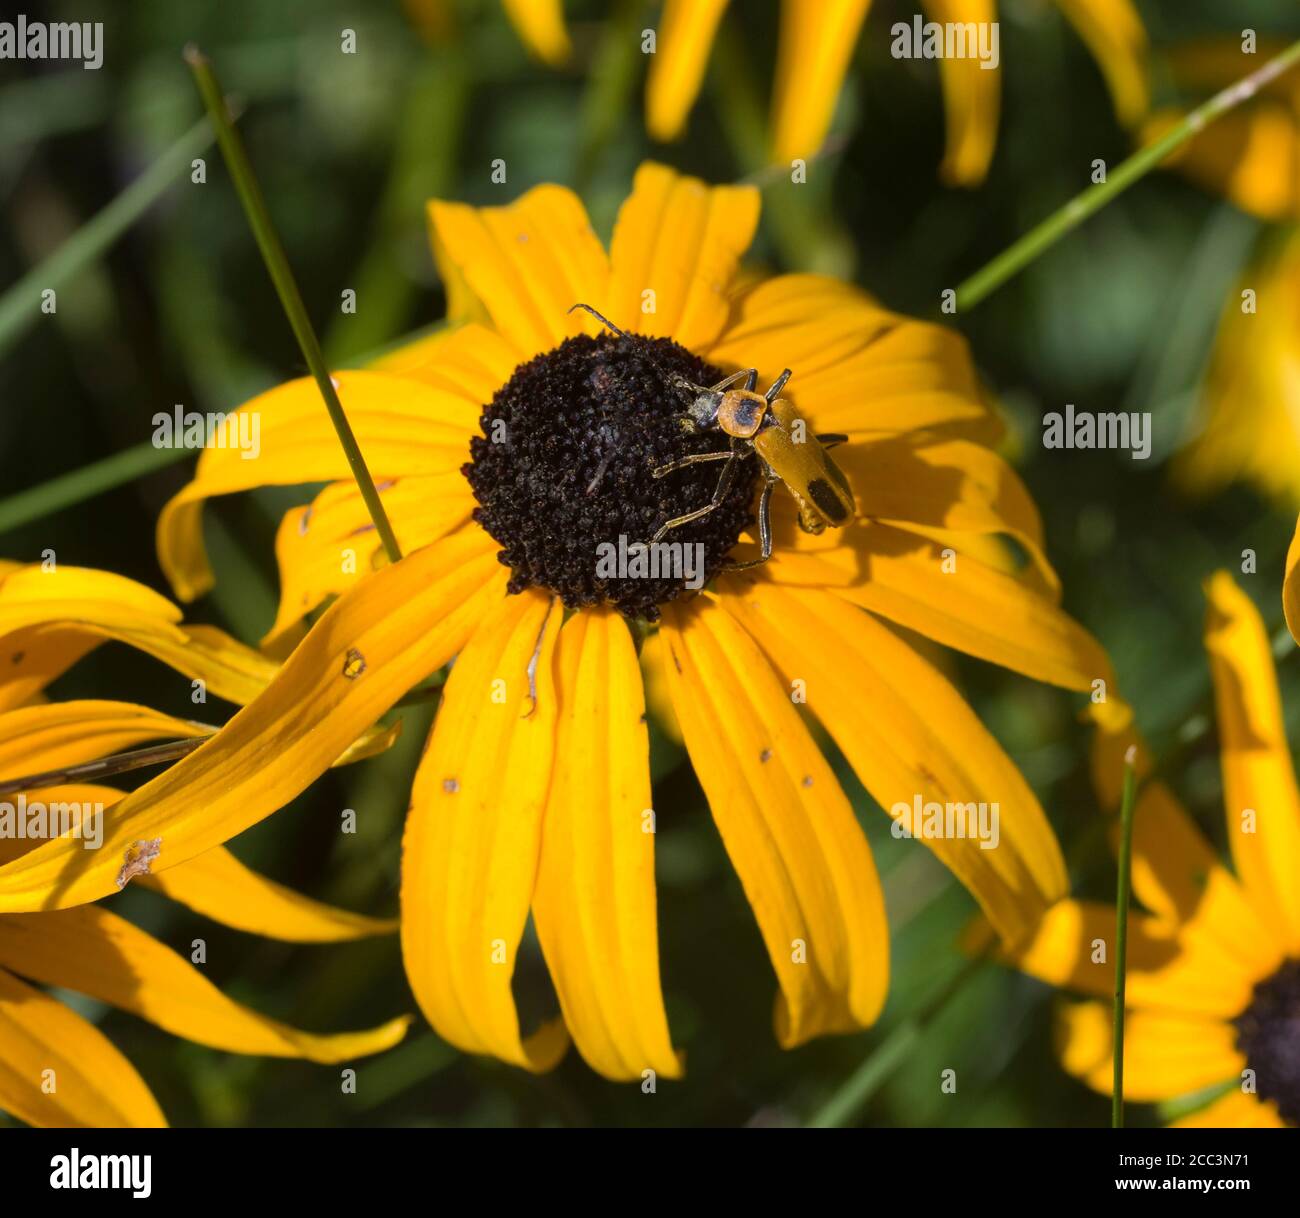 Pennsylvania Leatherwing Beetle, Chauliognathus pensylvanicus or Soldier Beetle hunting aphids other insect larvae on Blackeyed Susan, Rudbeckia hirta Stock Photo